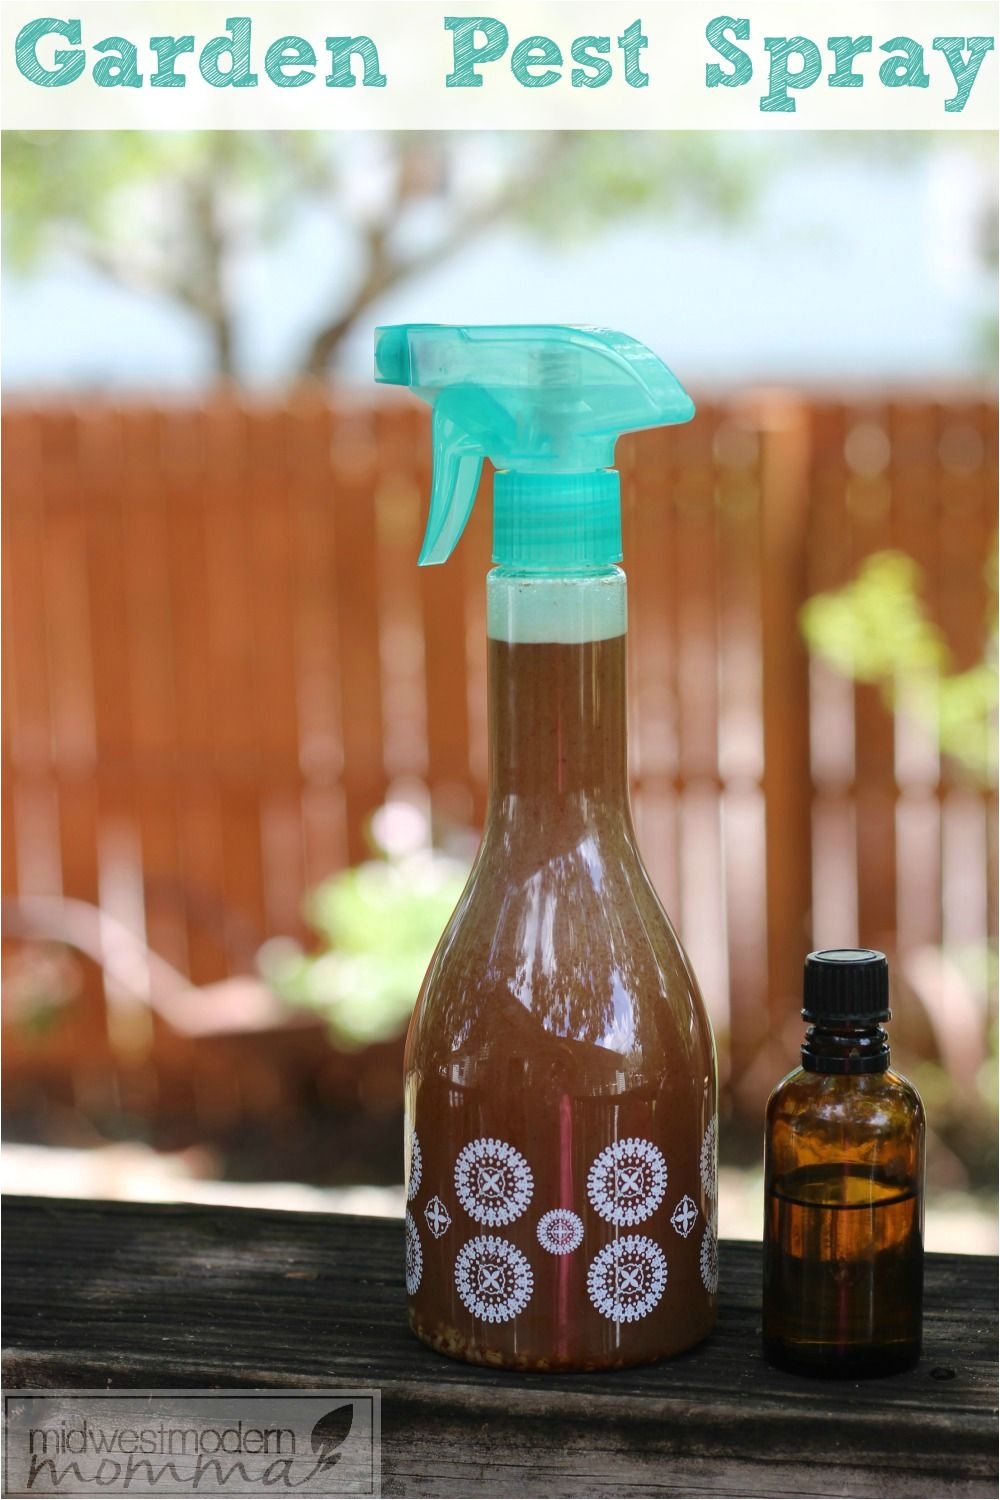 natural pest control has never been easier than with our diy garden pest repellent spray make a batch of this easy and effective spray to keep critters off